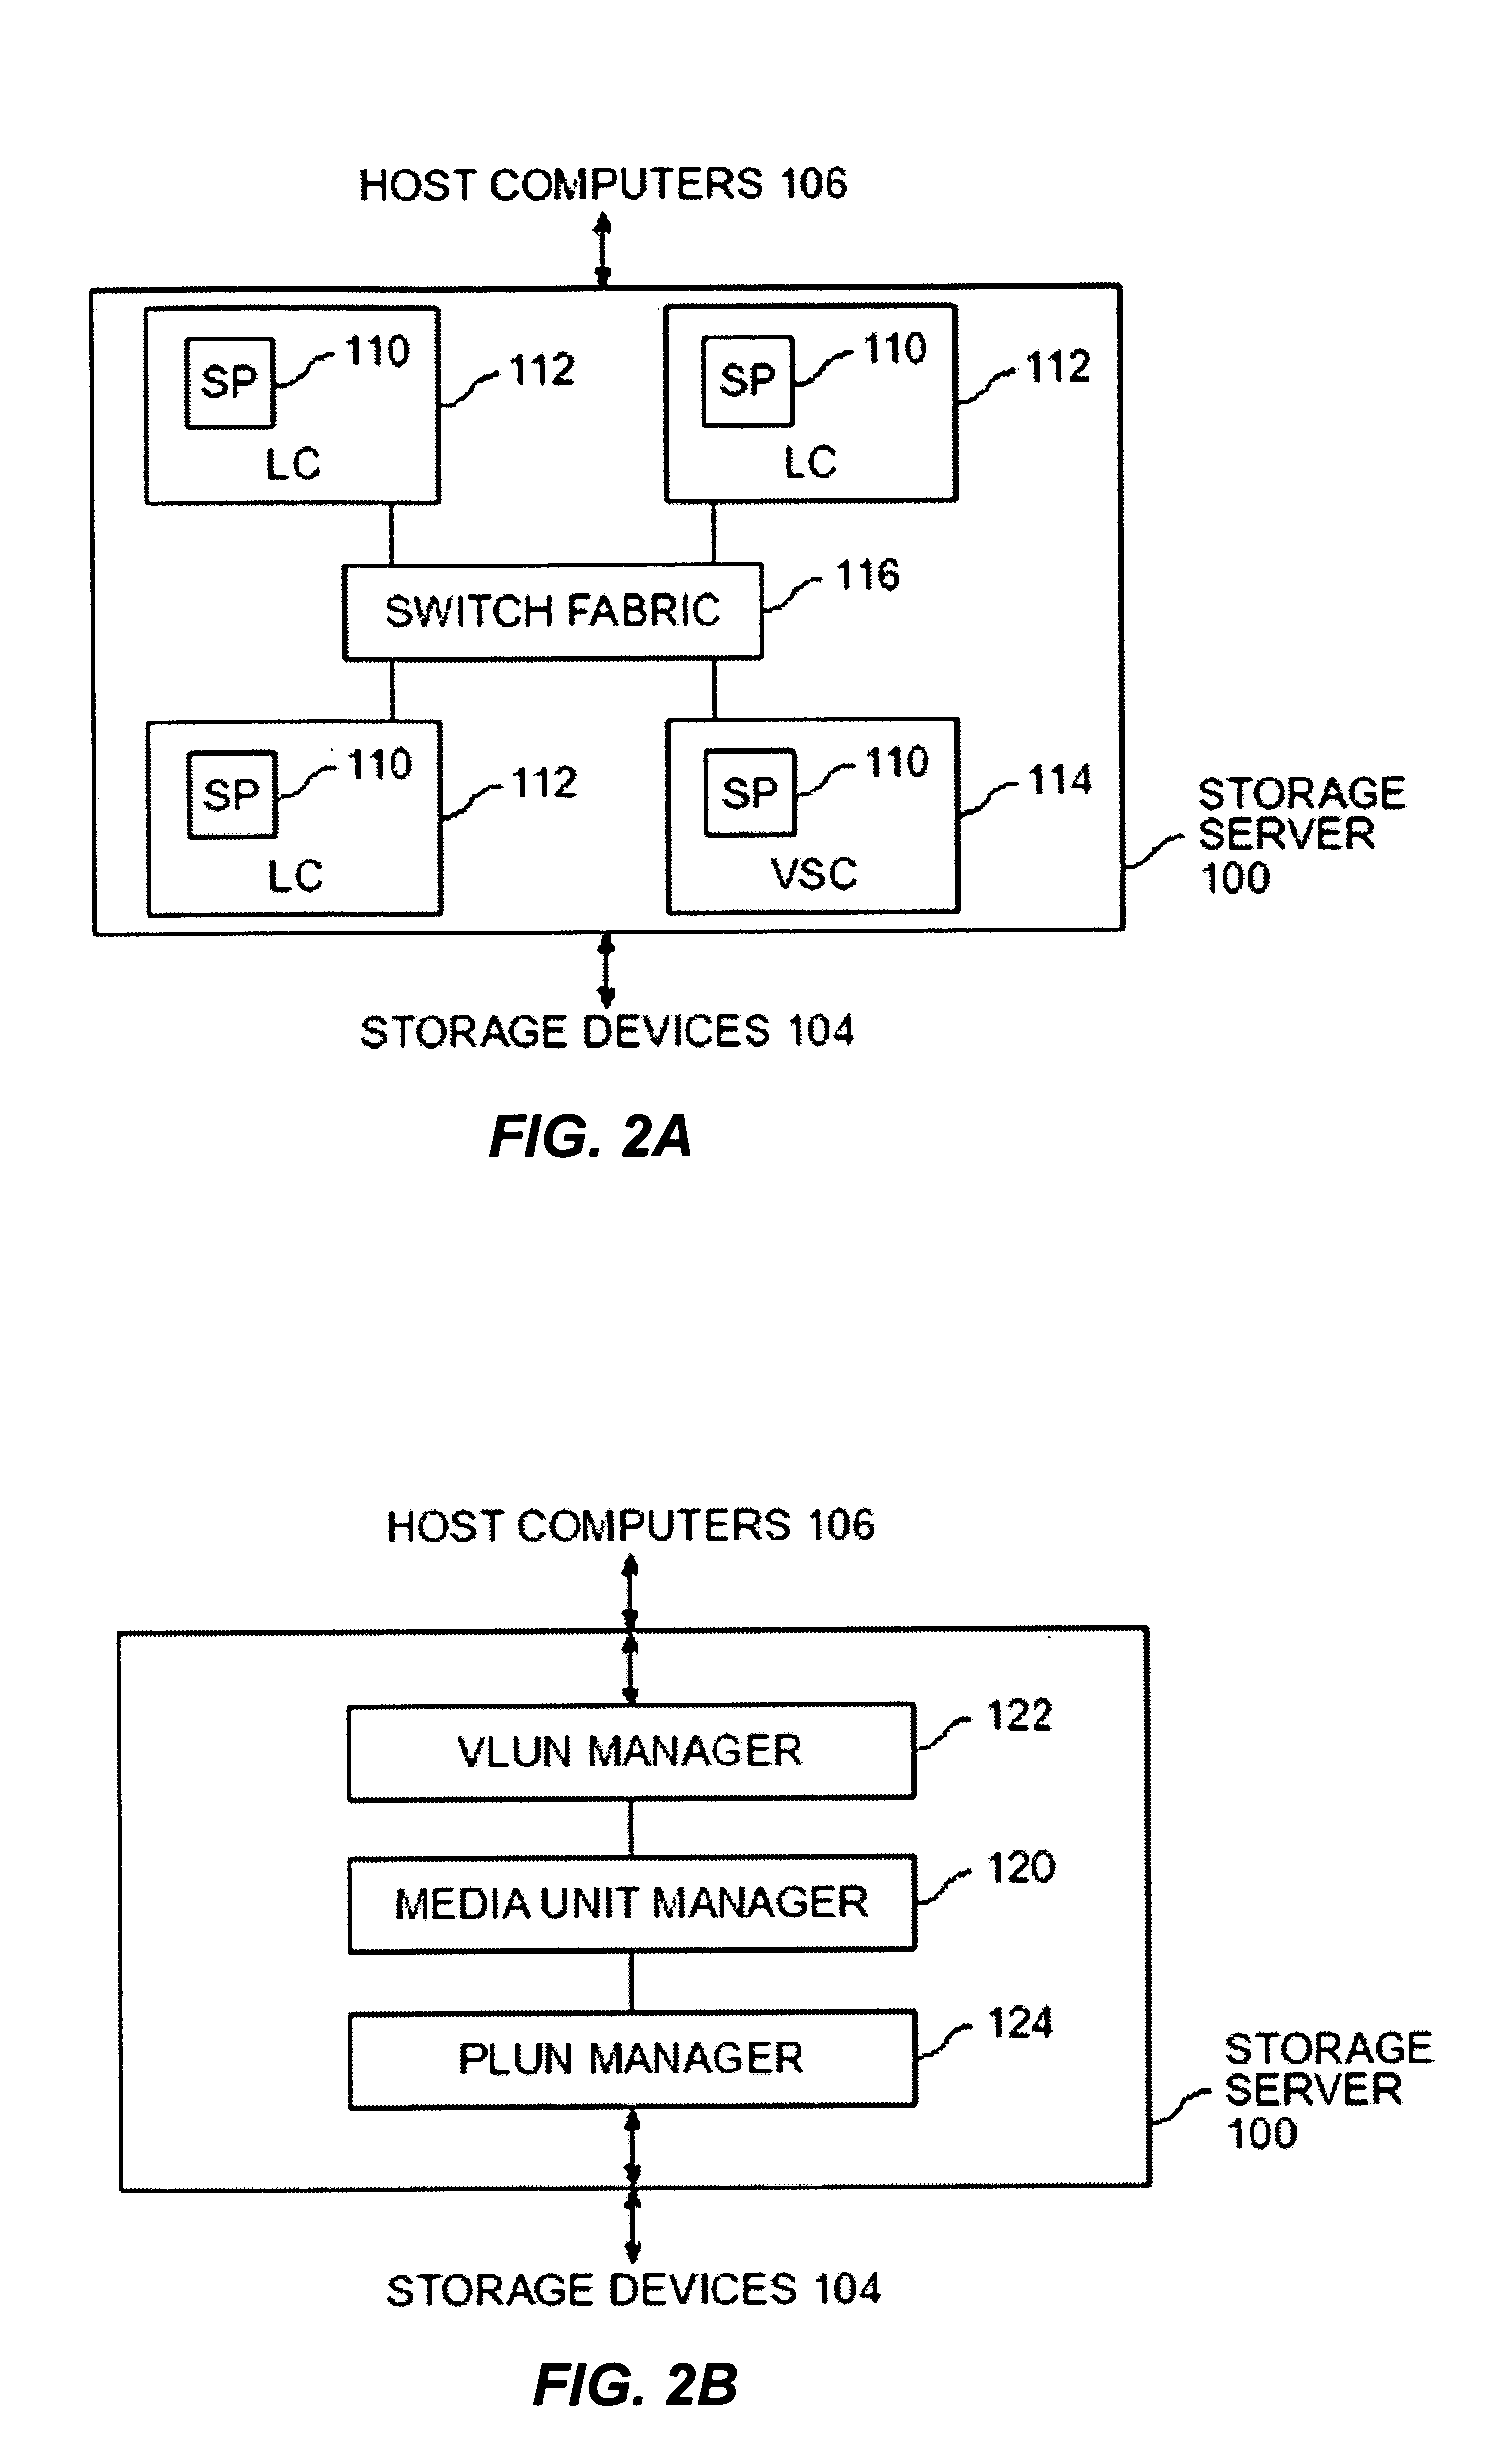 Apparatus and method for searching a n-branch data structure using information in entries